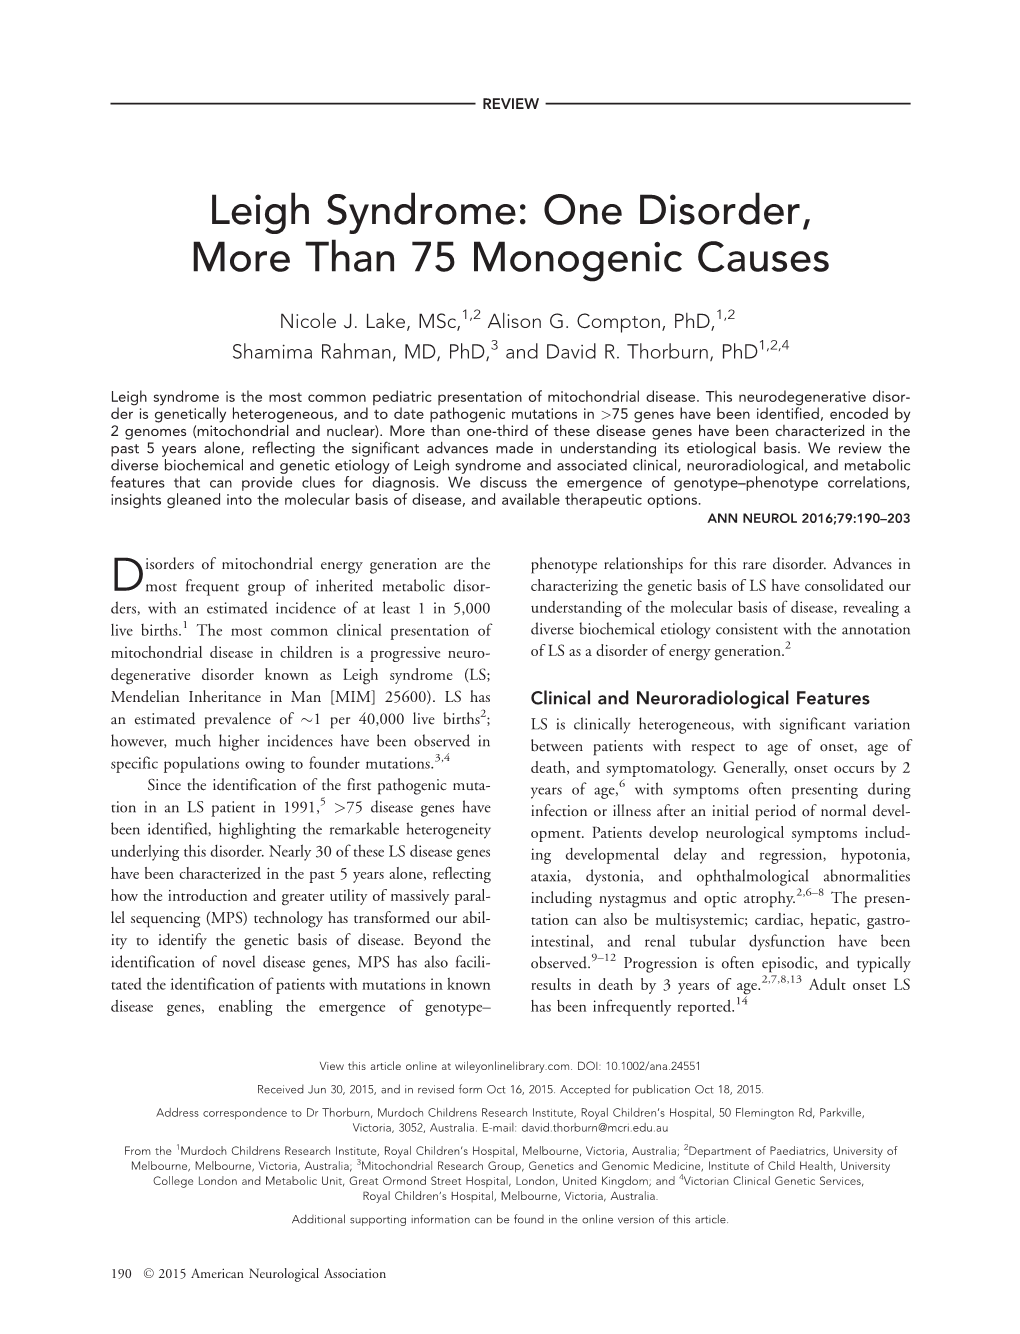 Leigh Syndrome: One Disorder, More Than 75 Monogenic Causes